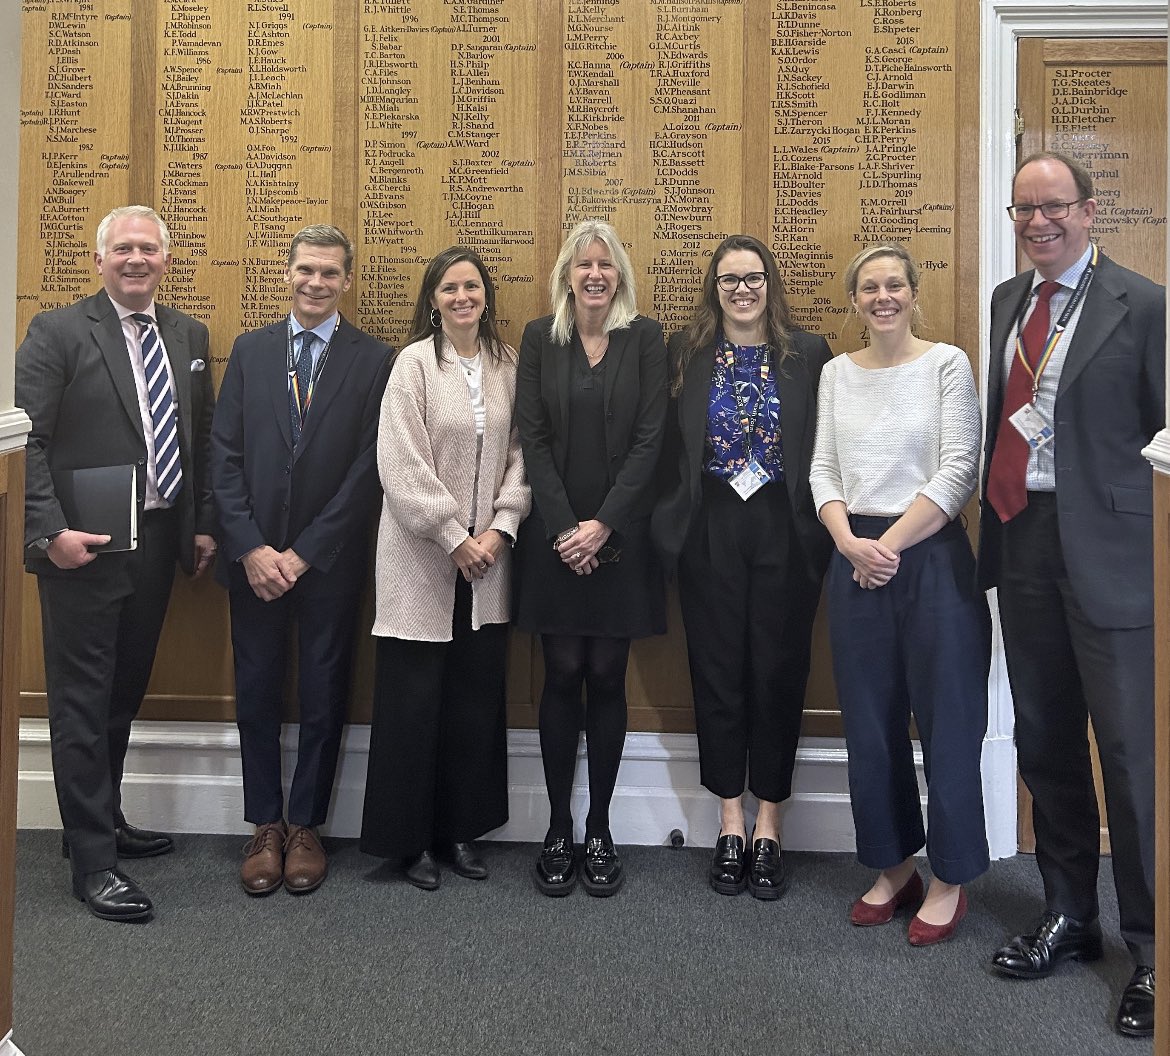 KGS academic staff hold positions in seven local primary schools on the board of governors. #powerofpartnerships #schoolstogether @KGS1561 @KGSheadmaster